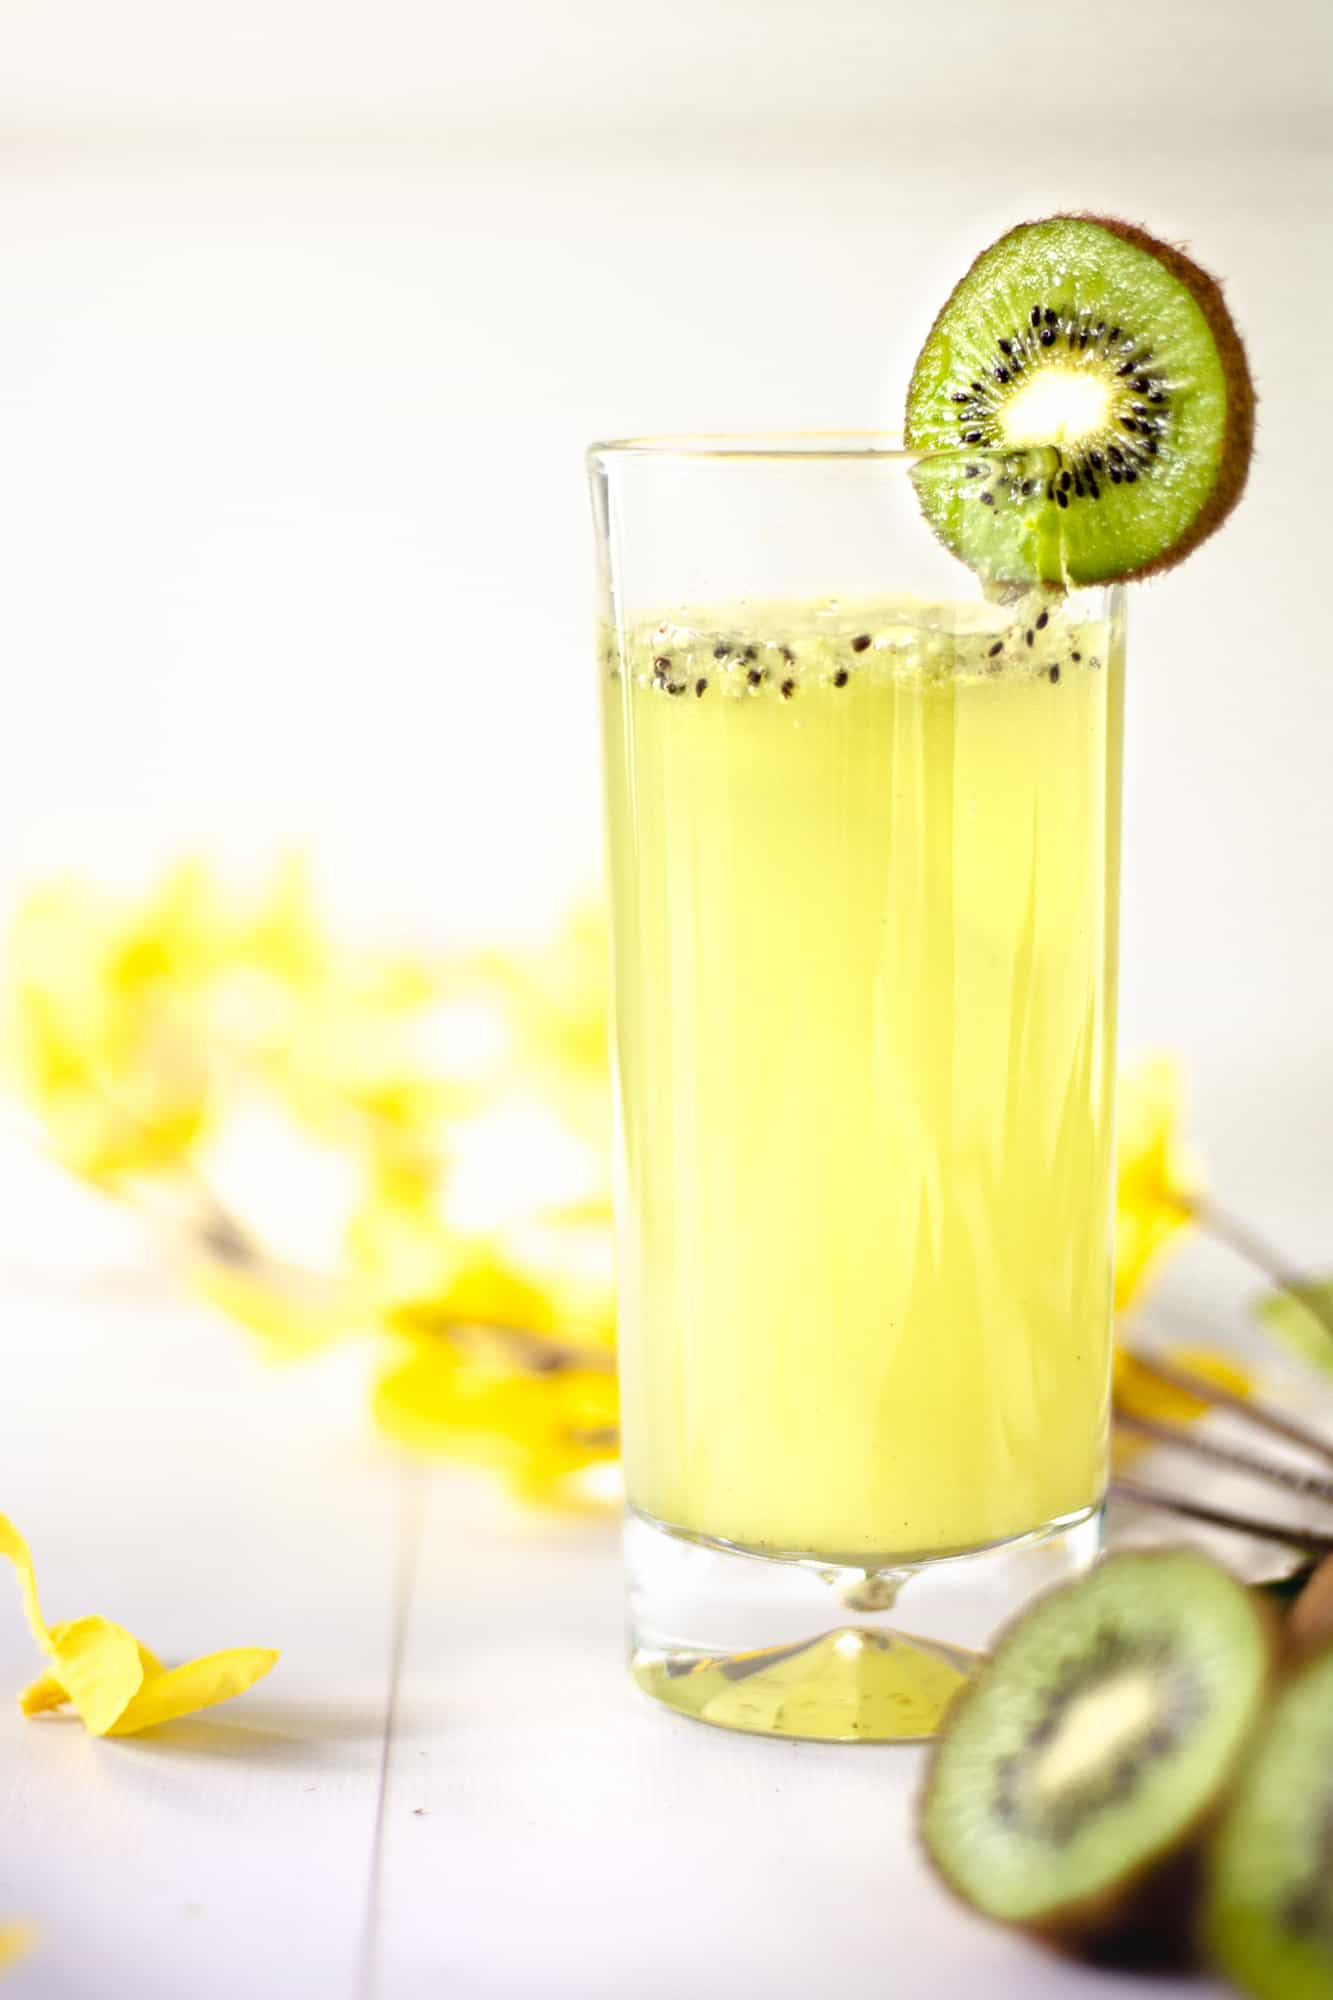 Up close view of a glass of kiwi gin cocktail garnished with kiwi, and kiwis and yellow flowers in the background